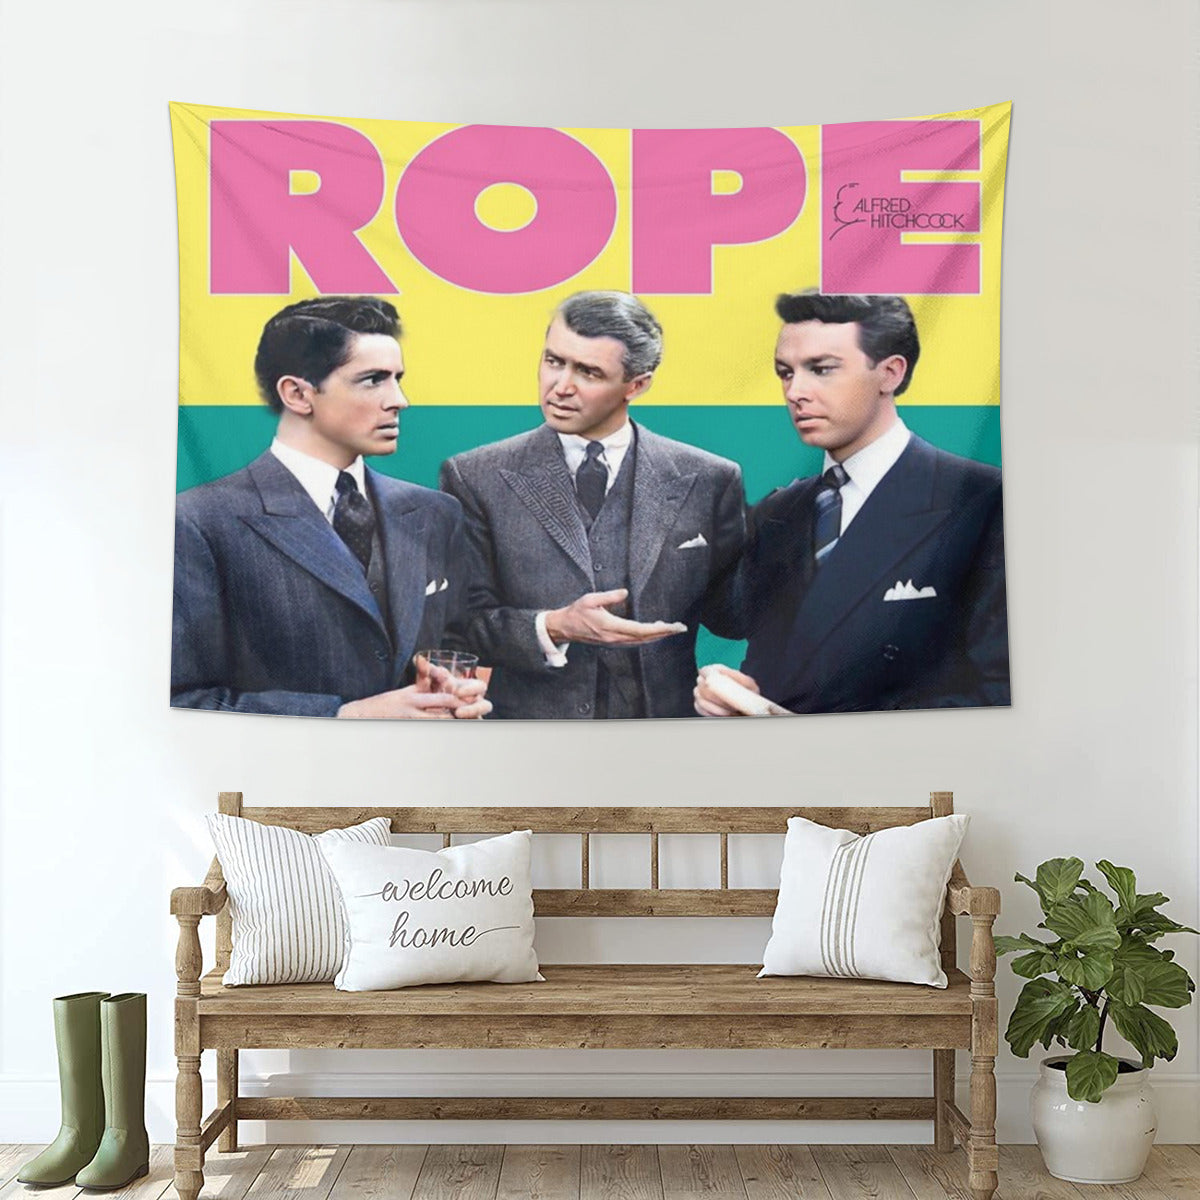 Alfred Hitchcock s Film Rope Becomes A Cocktail For A Corpse Officially Licensed Fan Art Tapestry